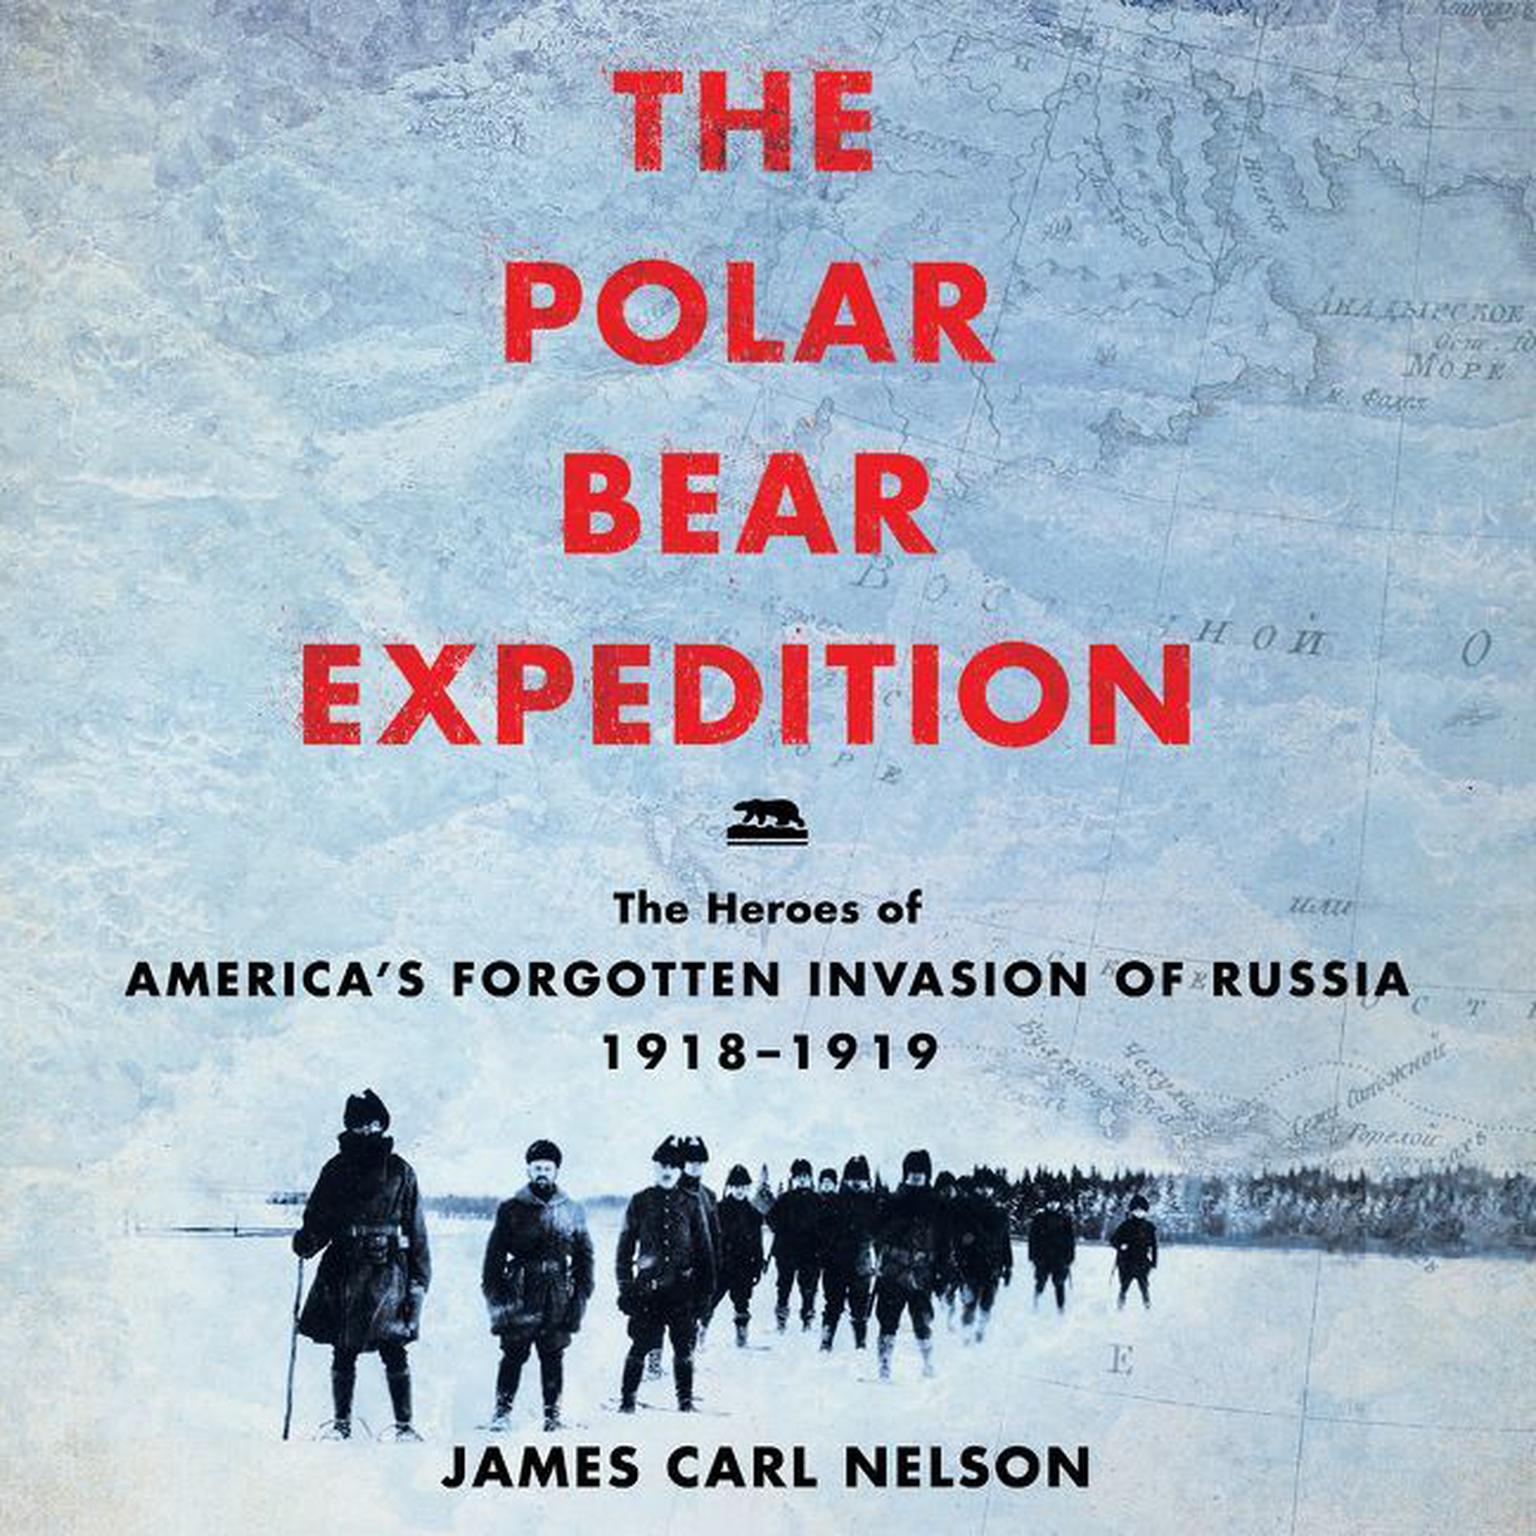 The Polar Bear Expedition: The Heroes of Americas Forgotten Invasion of Russia, 1918-1919 Audiobook, by James Carl Nelson